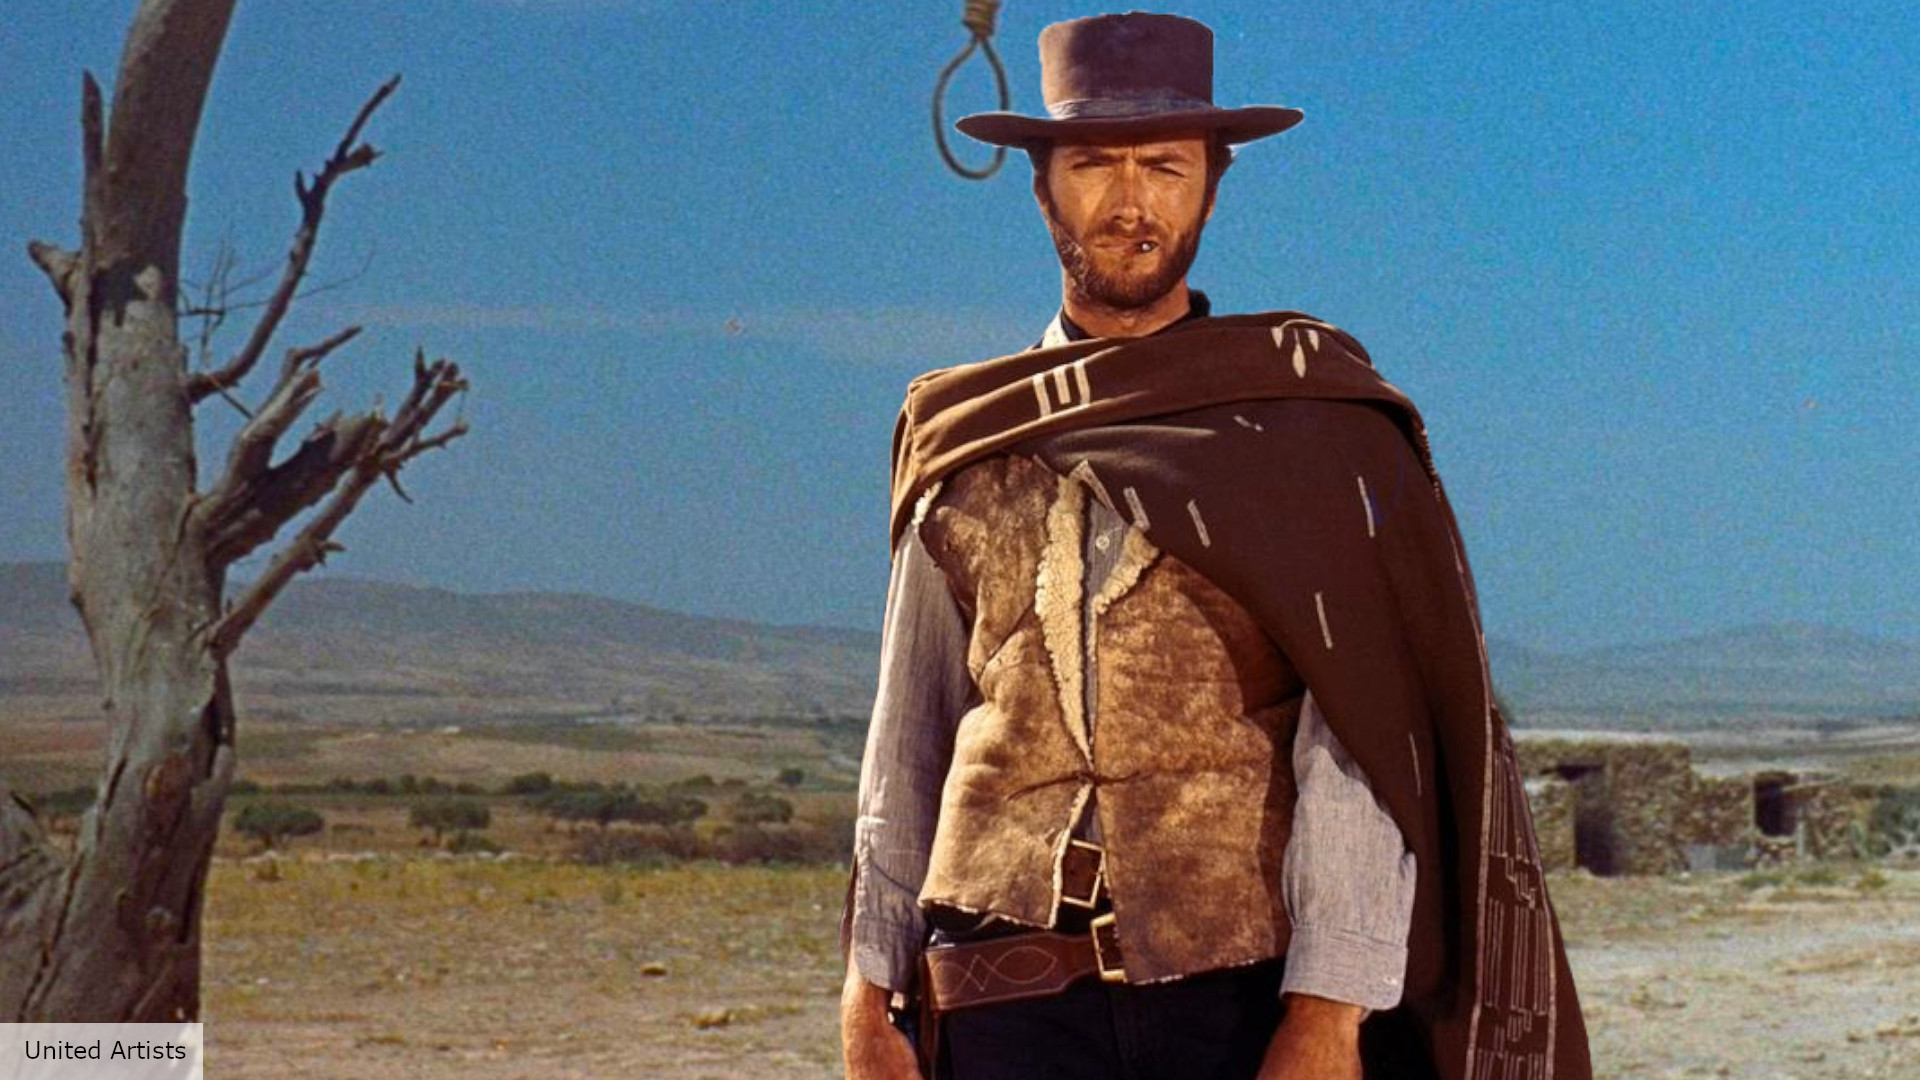 Clint Eastwood absolutely hated the cigars in A Fistful of Dollars